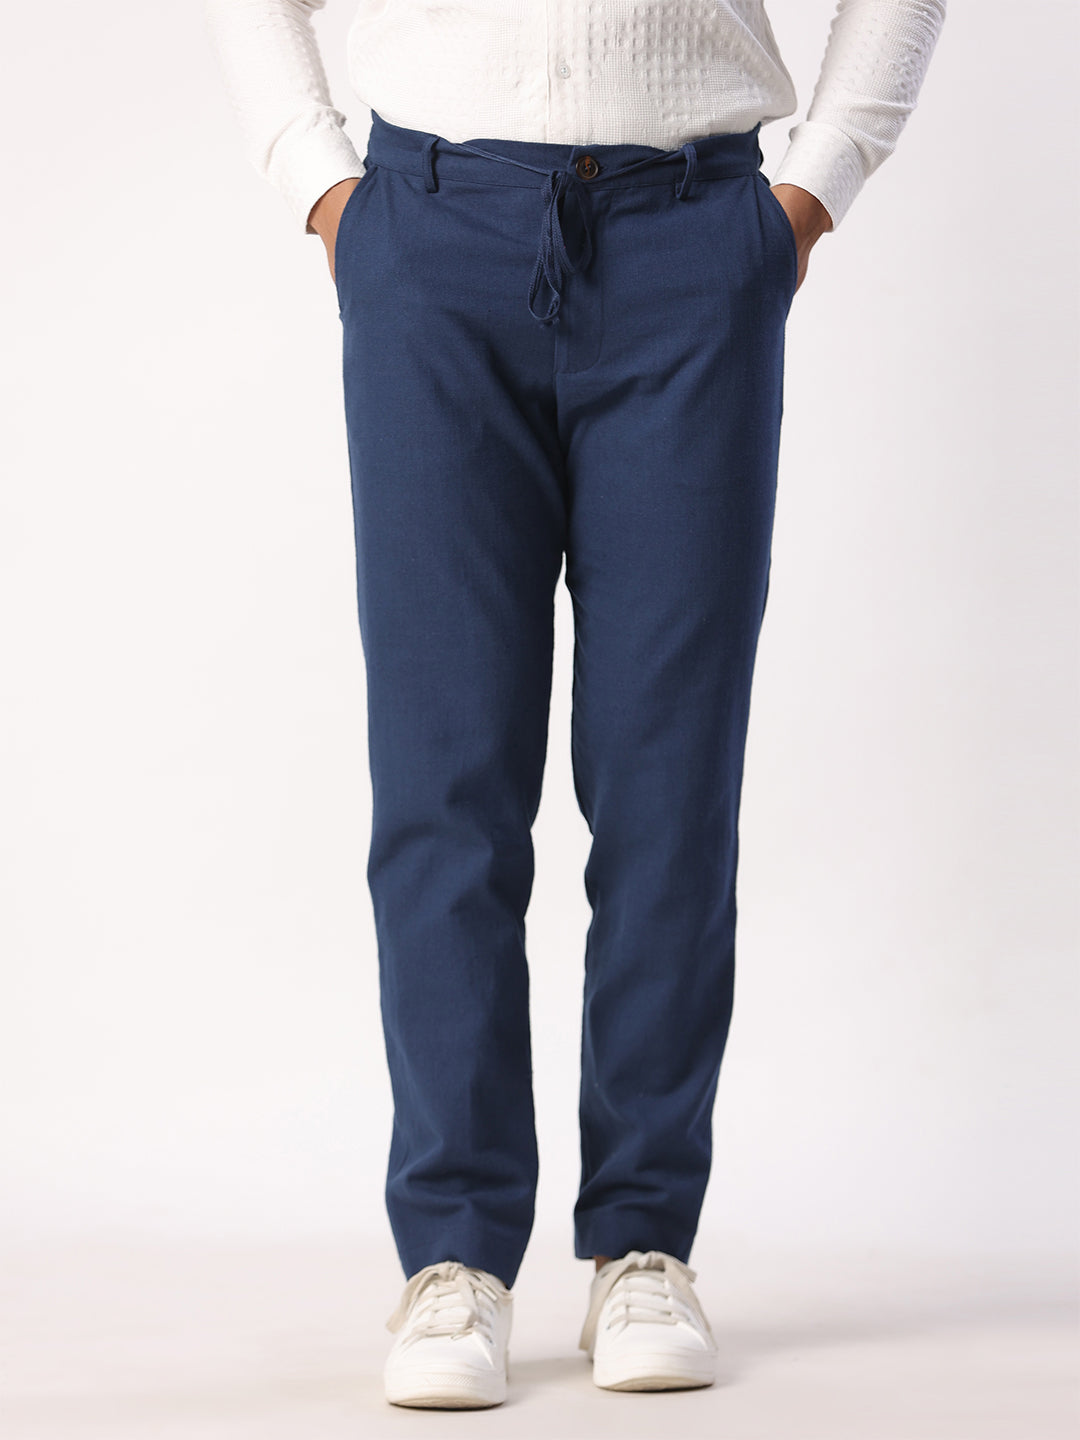 Nuon by Westside Beige Relaxed Fit Pants